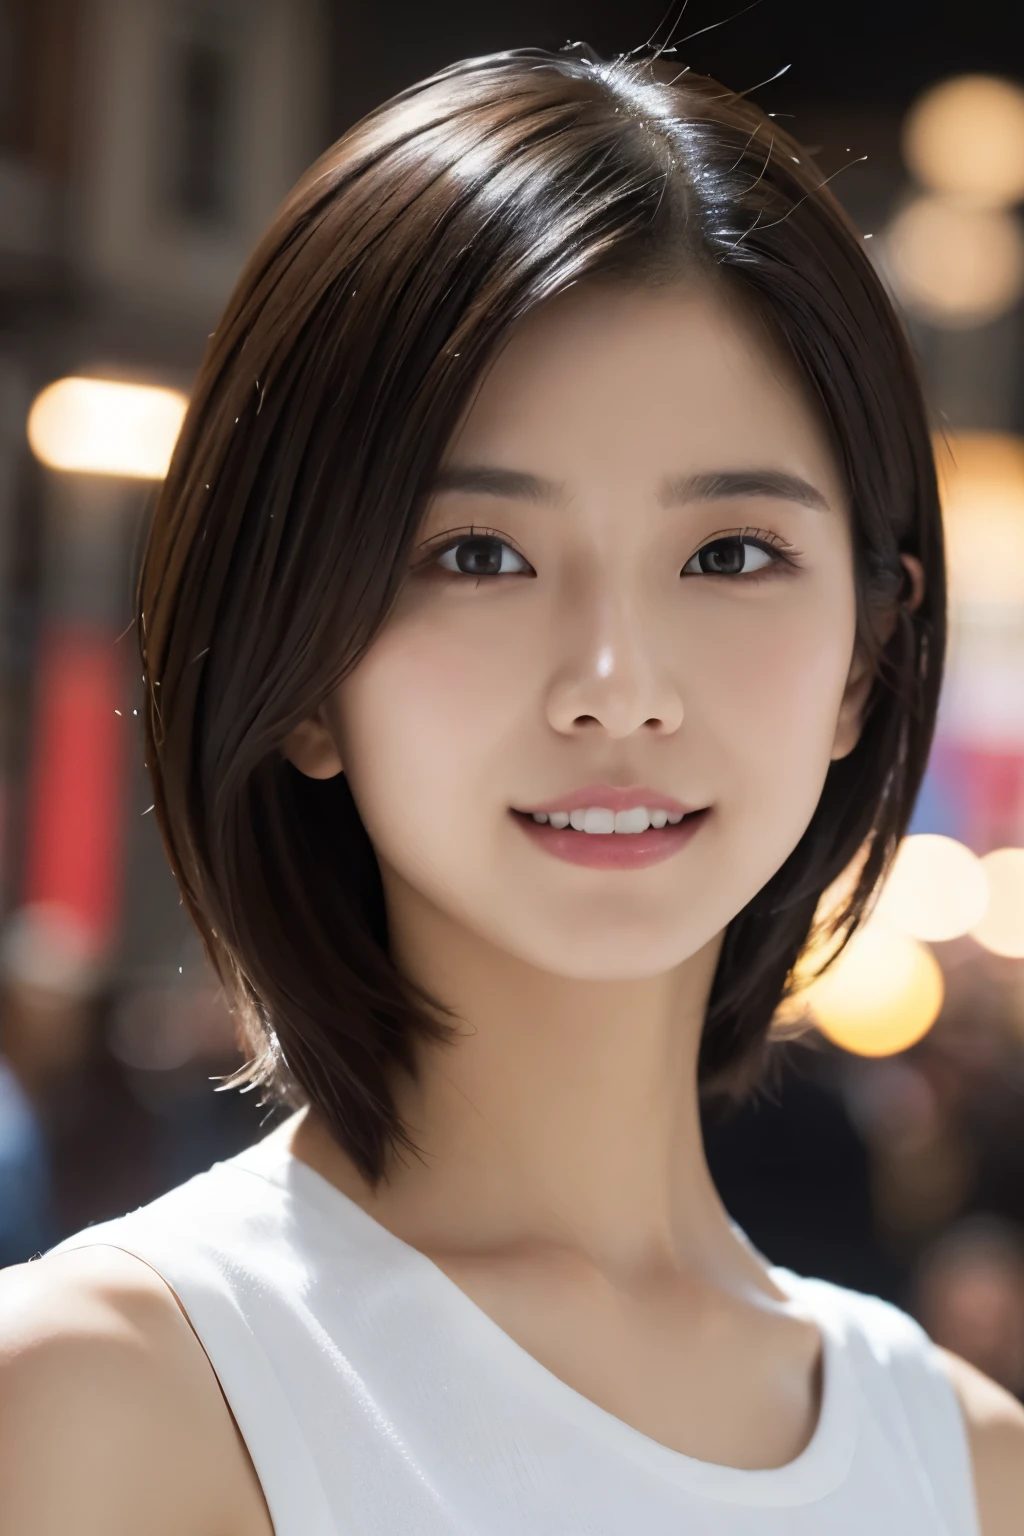 close-up photo of face、1 girl, (white classy tank top:1.2), (RAW photo, highest quality), (realistic, Photoreal:1.4), table top, very delicate and beautiful, very detailed, 2k wallpaper, wonderful, finely, Very detailed CG Unity 8k 壁紙, super detailed, High resolution, soft light, beautiful detailed girl, very detailed目と顔, beautifully detailed nose, detailed and beautiful eyes, cinematic lighting, night city lights, perfect anatomy, slender body, smile